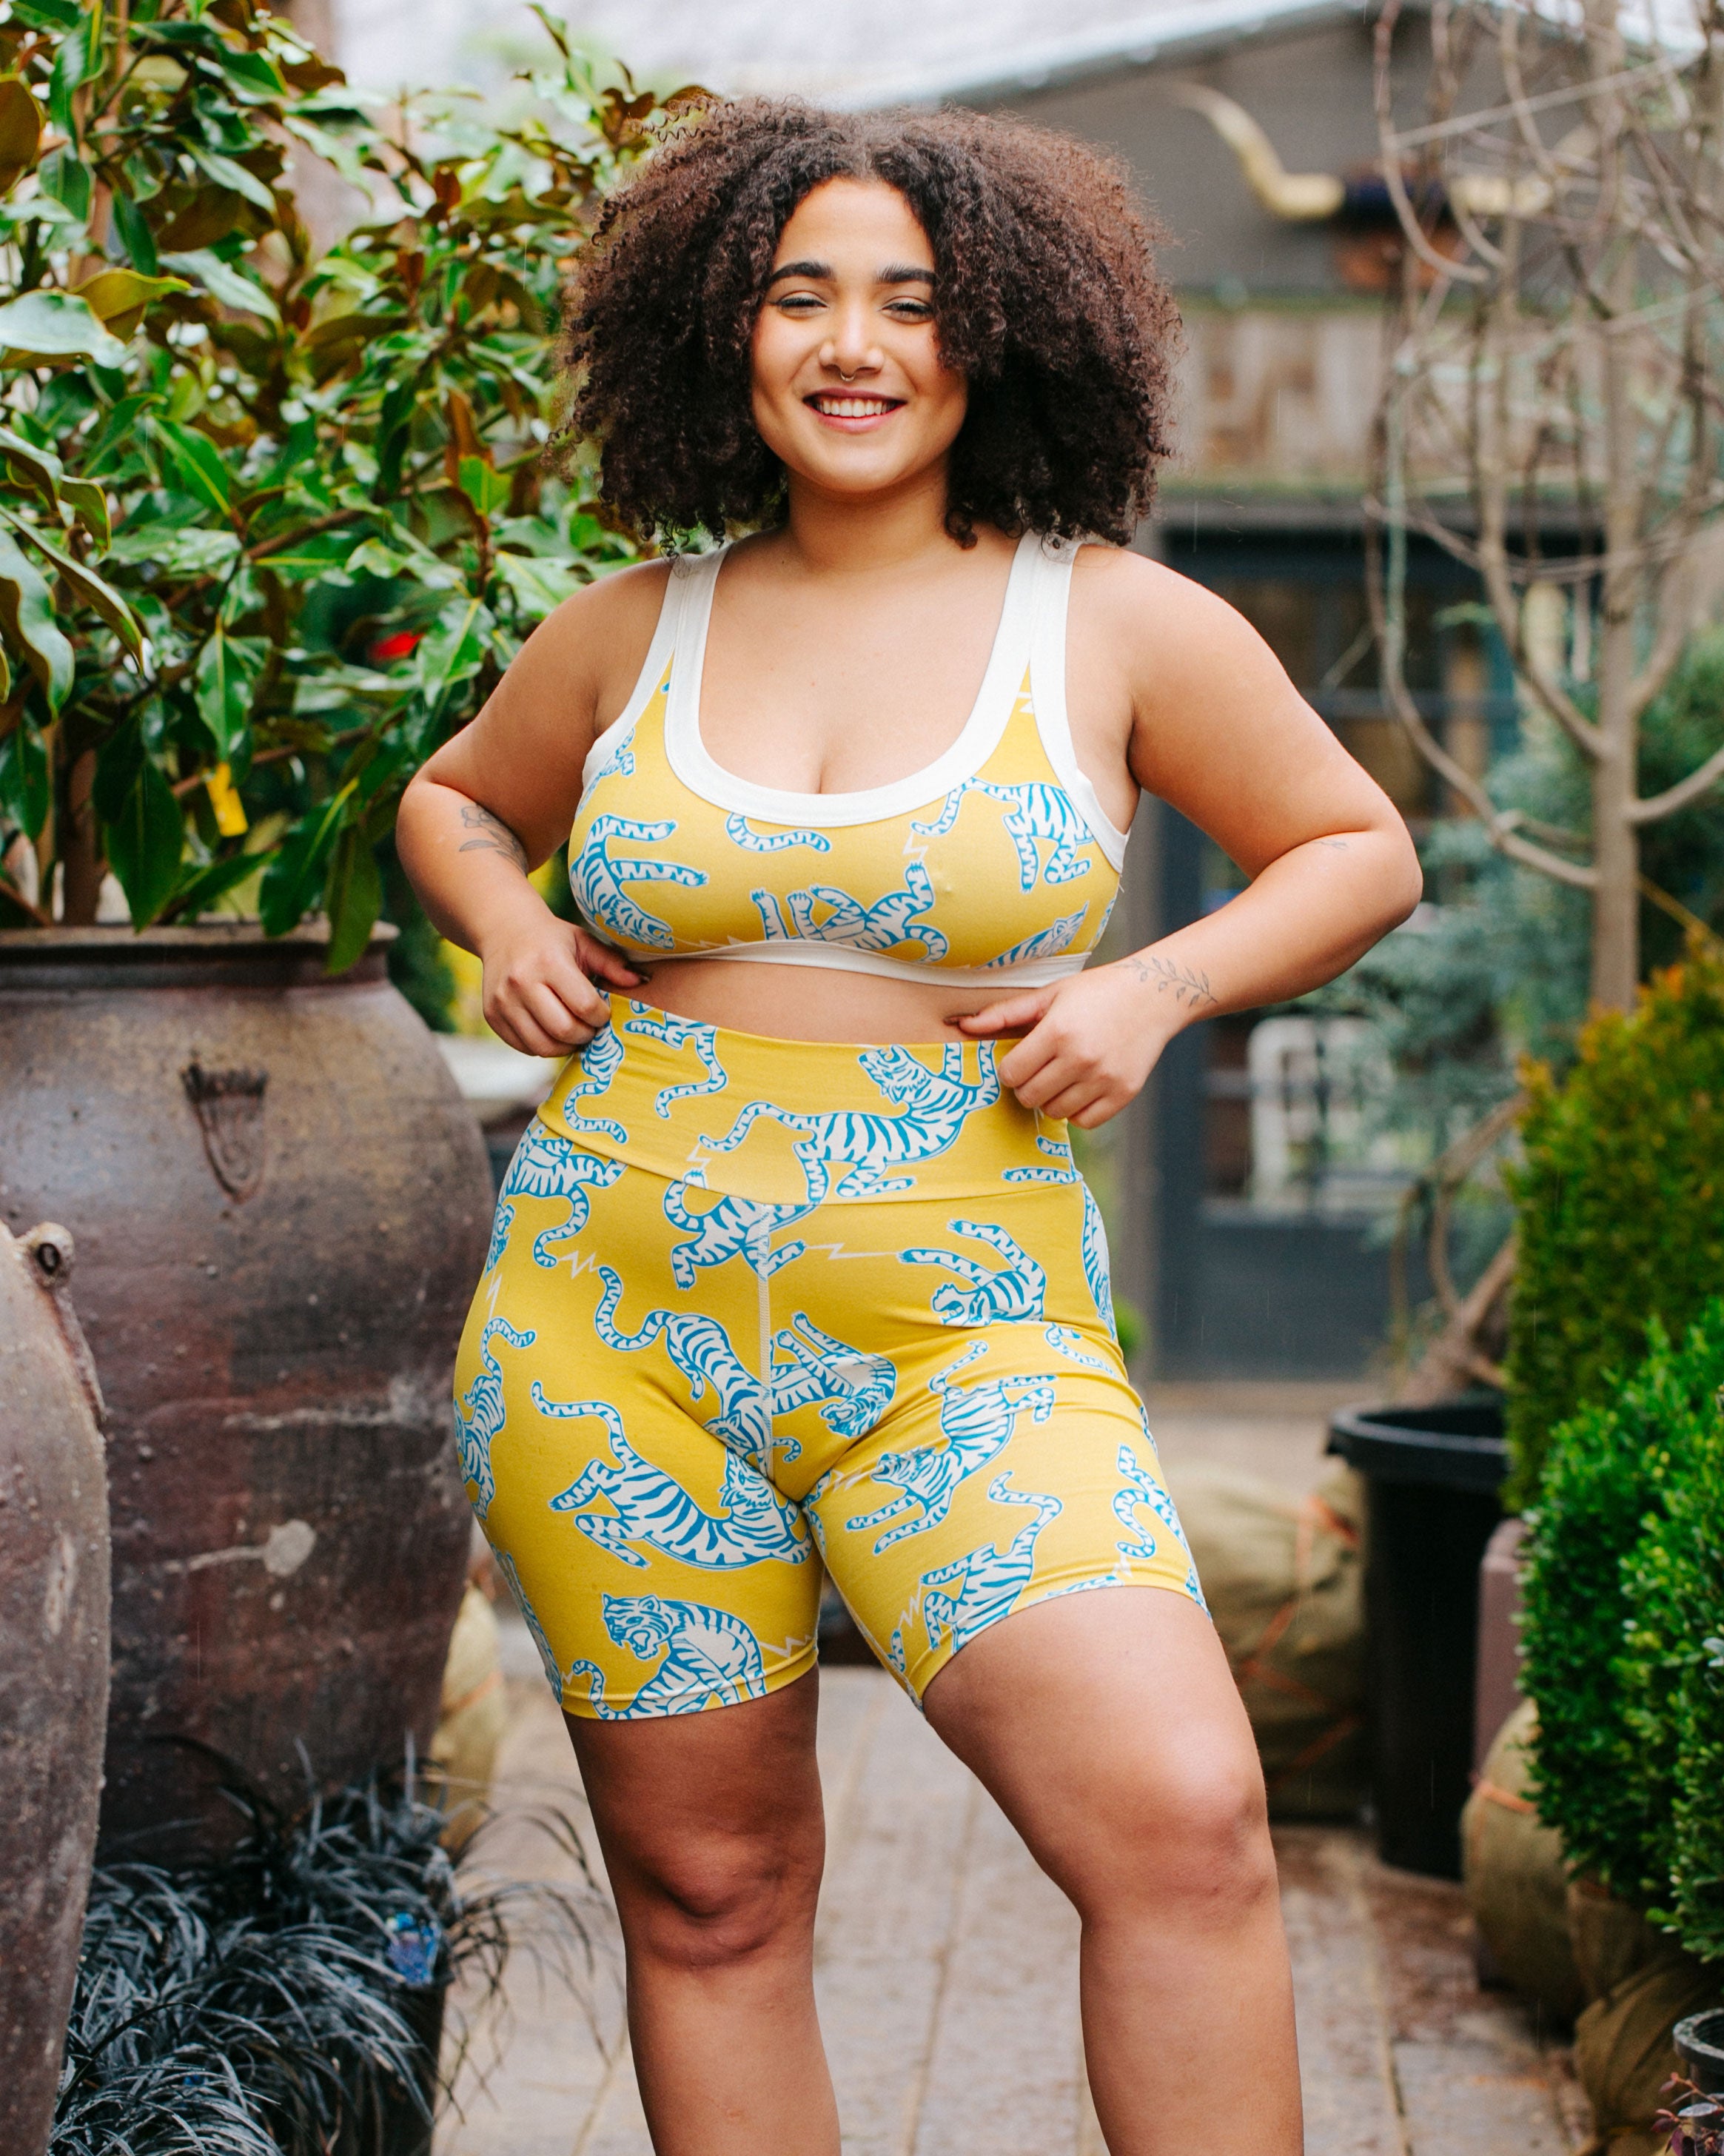 Model smiling while wearing Thunderpants organic cotton Bike Shorts and Bralette in Easy Tiger - chartreuse with blue and white tigers.